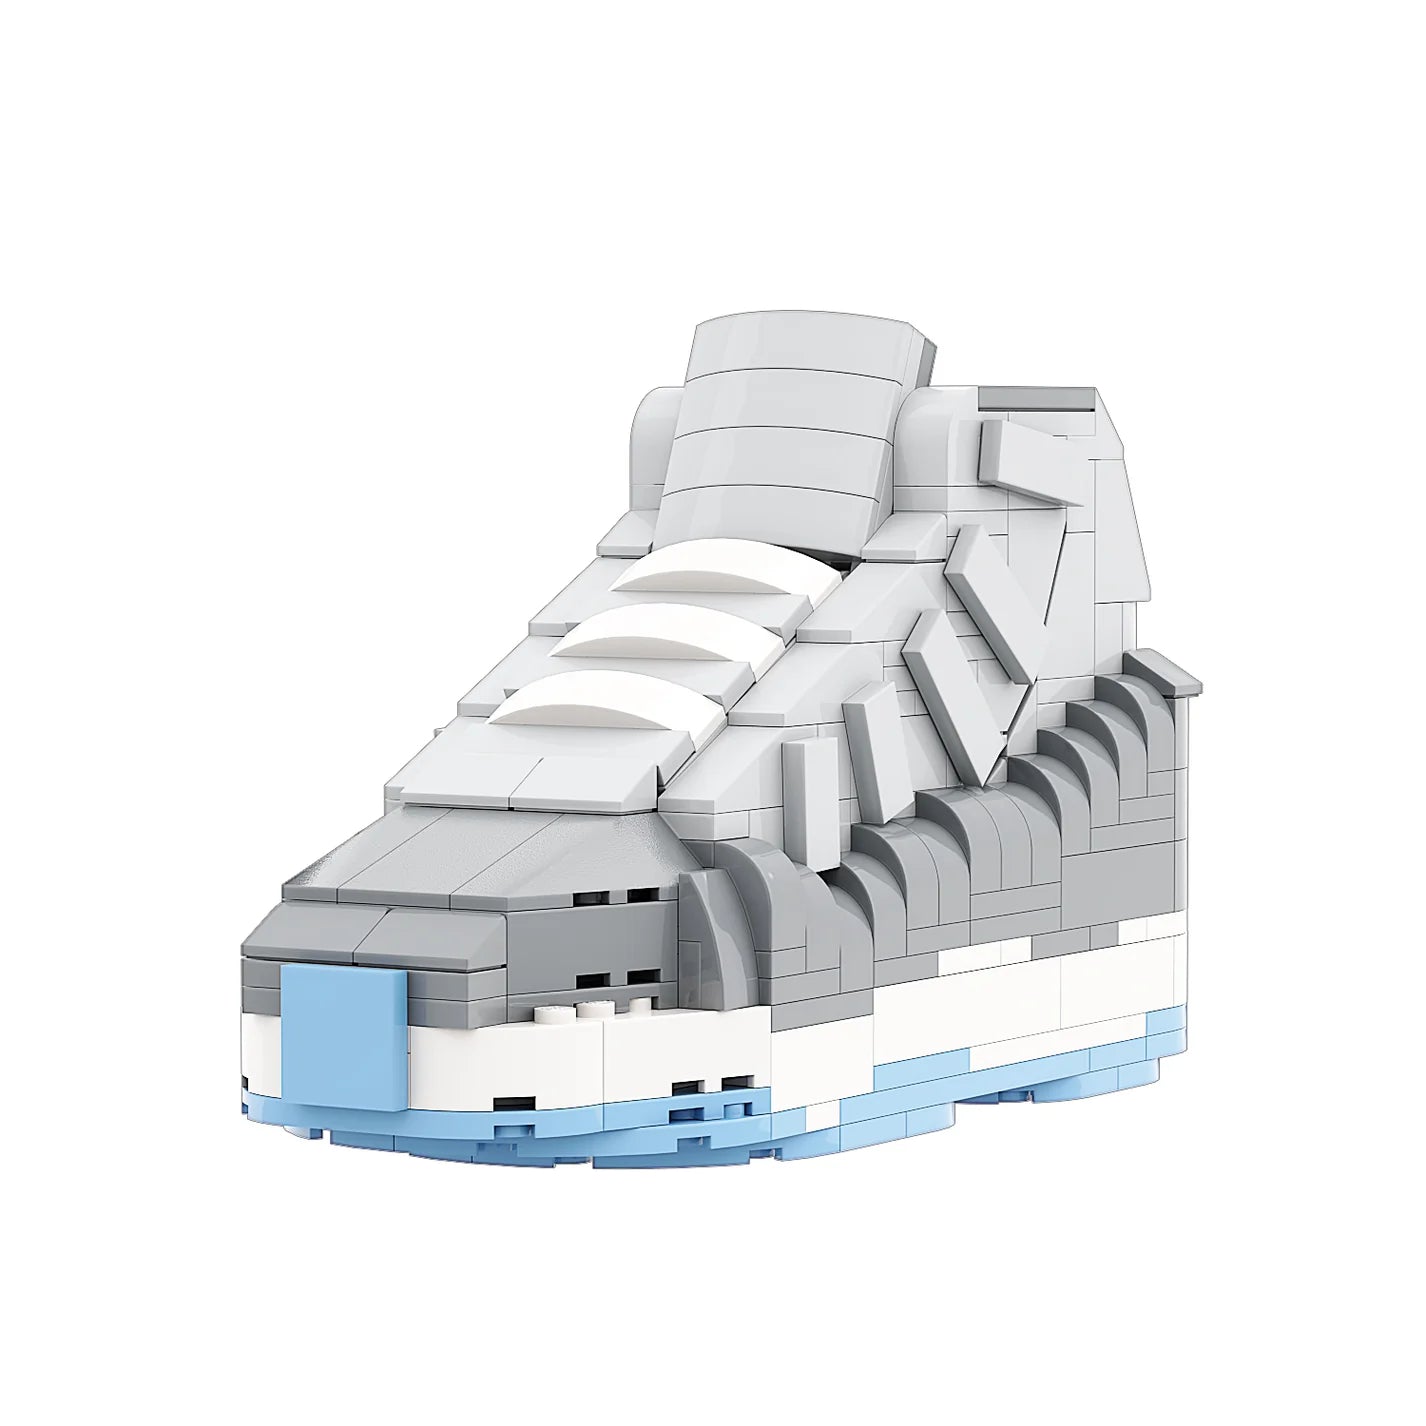 NIKE's vintage air jordan 11 makes a comeback as sneakers made entirely of  LEGO bricks